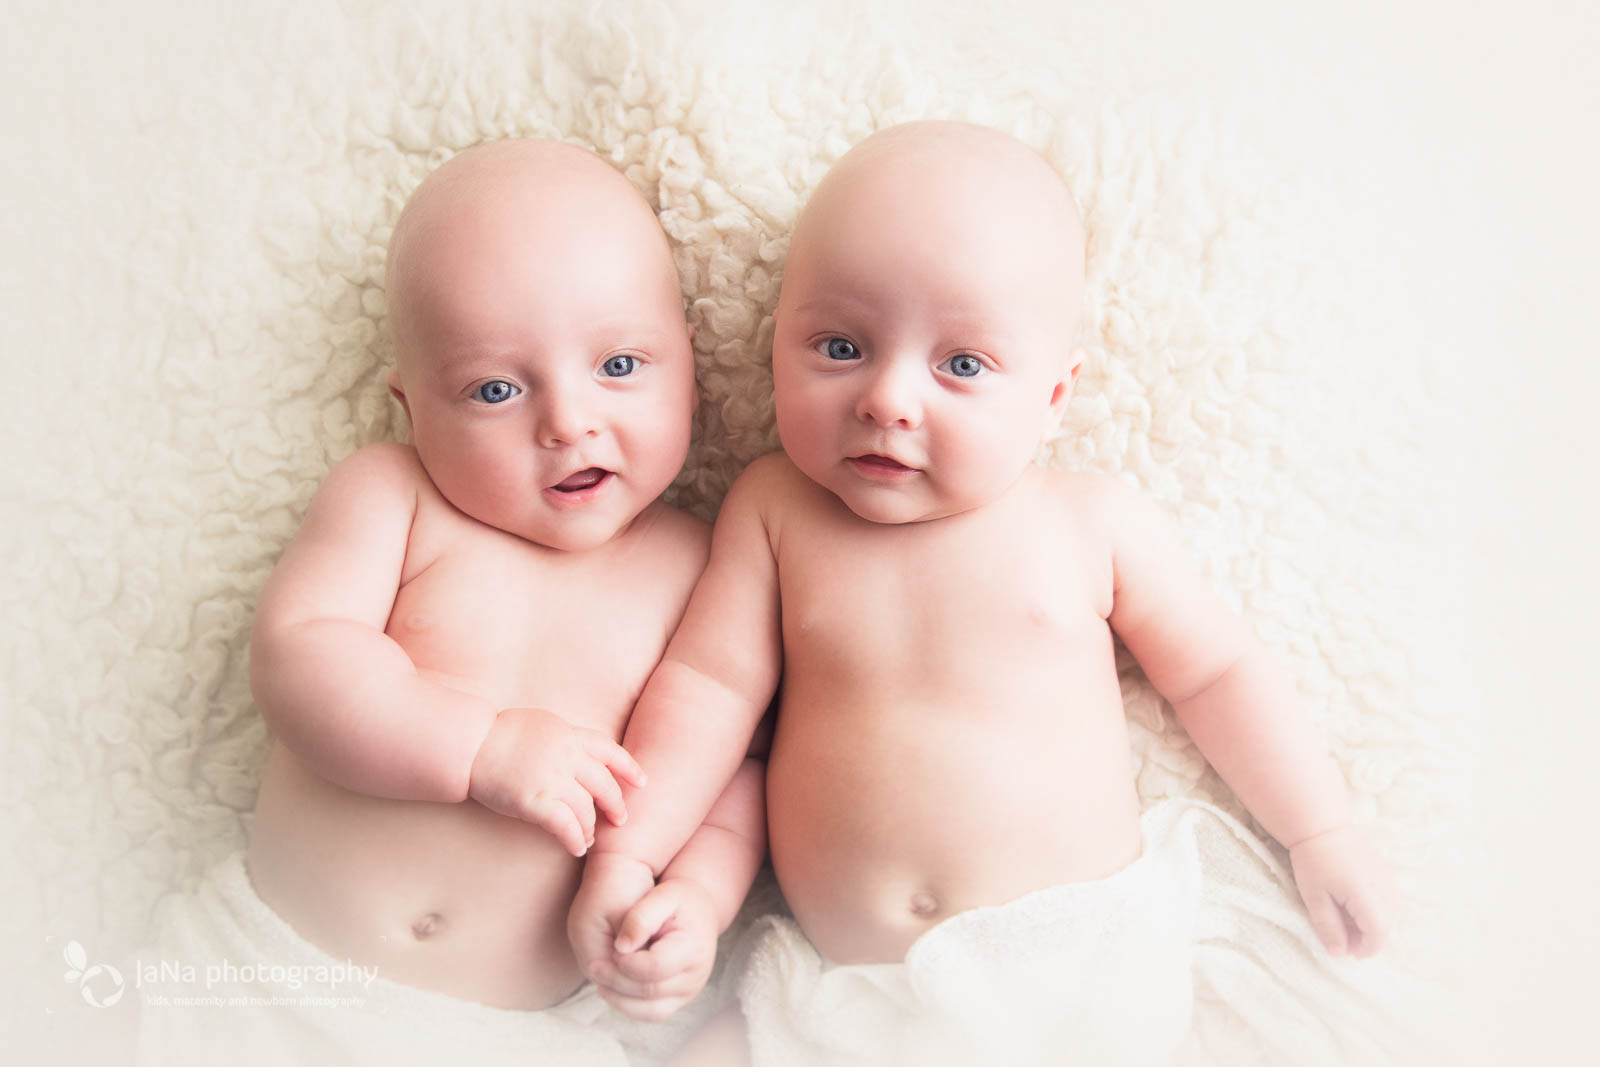 vancouver baby photography - twins